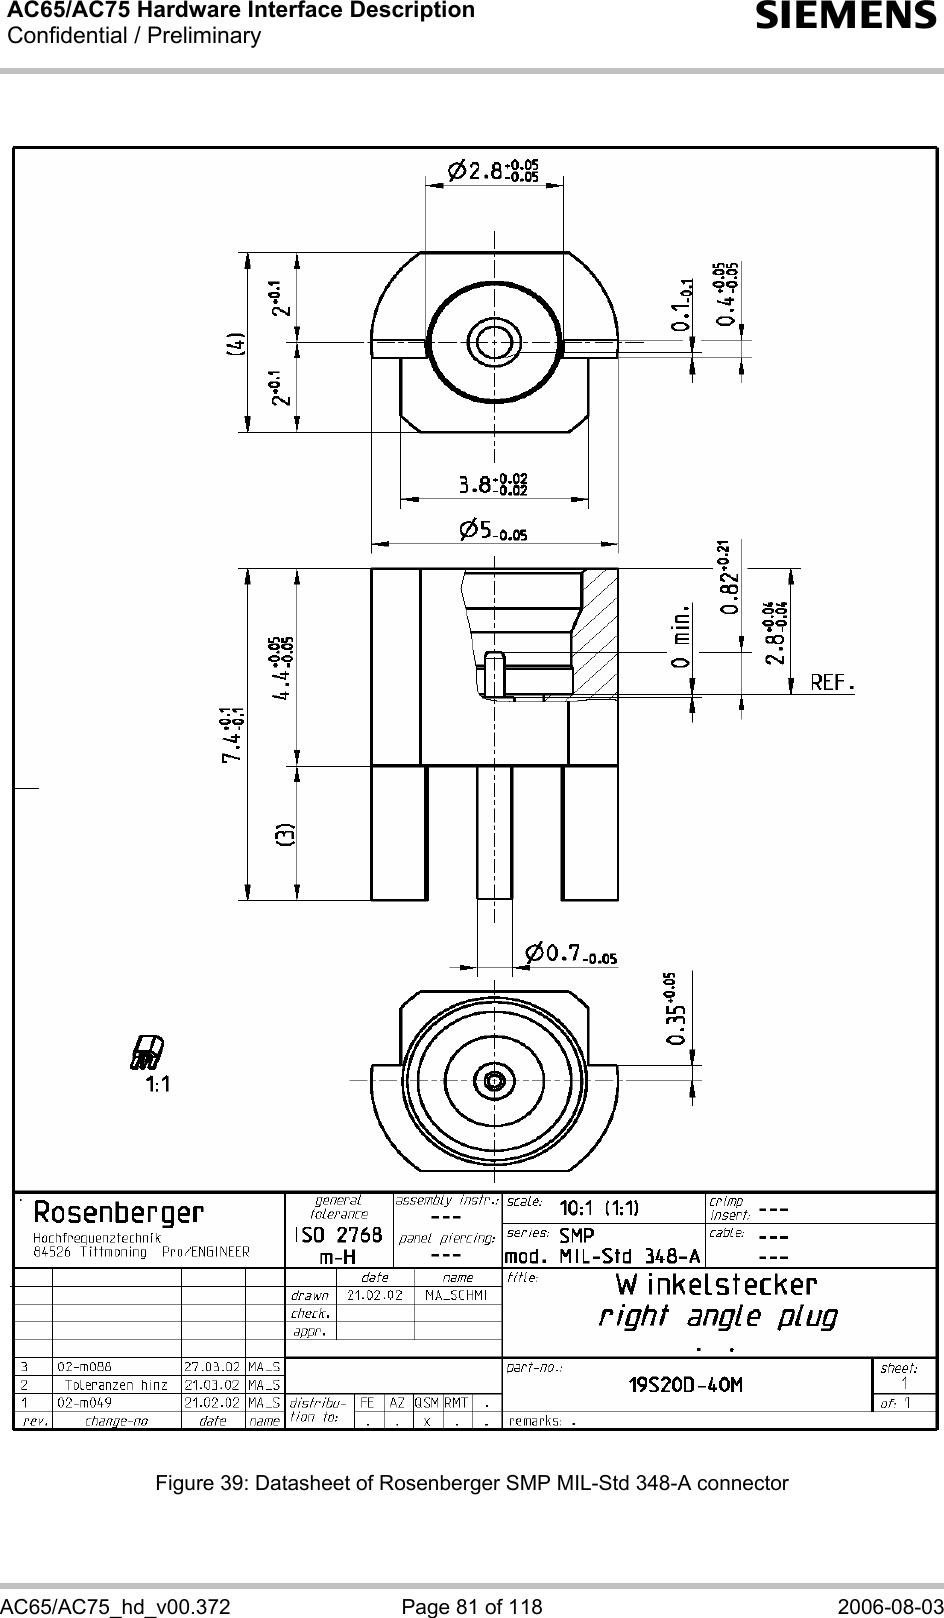 AC65/AC75 Hardware Interface Description Confidential / Preliminary   s AC65/AC75_hd_v00.372  Page 81 of 118  2006-08-03   Figure 39: Datasheet of Rosenberger SMP MIL-Std 348-A connector 